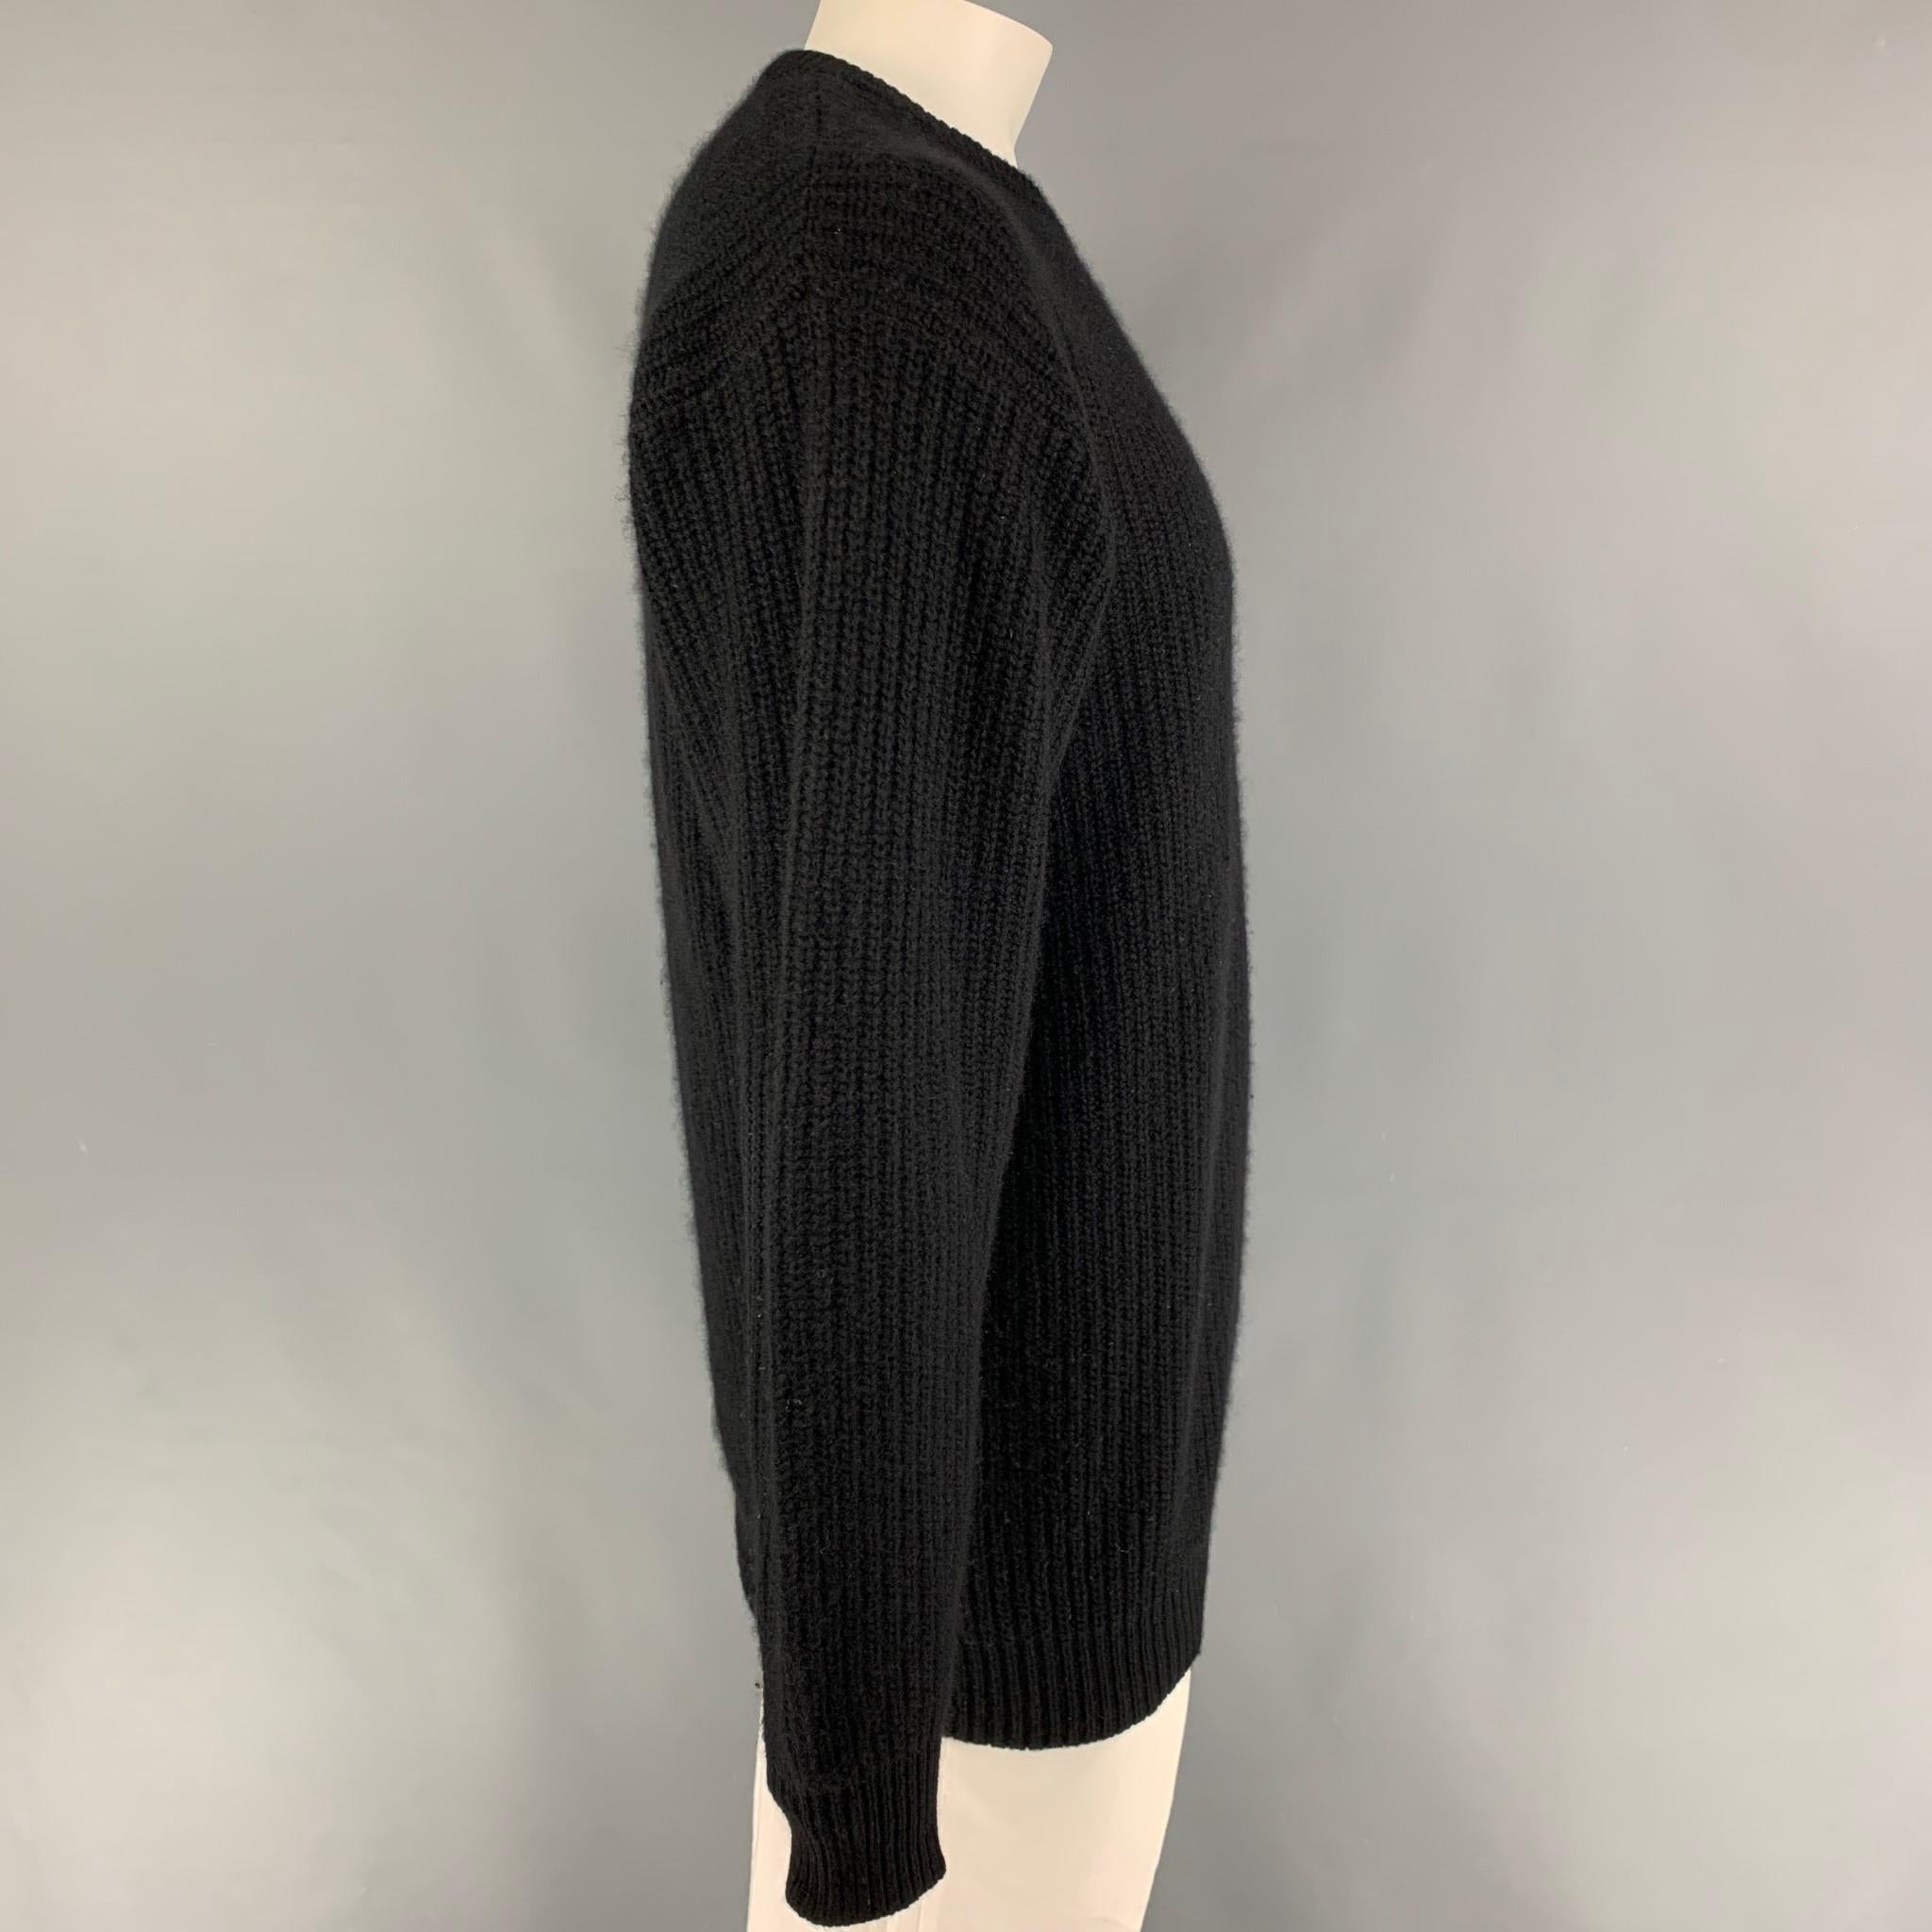 NEIMAN MARCUS sweater comes in a black knitted cashmere featuring a crew-neck. 

Very Good Pre-Owned Condition.
Marked: XXL

Measurements:

Shoulder: 23 in.
Chest: 50 in.
Sleeve: 27.5 in.
Length: 31 in. 